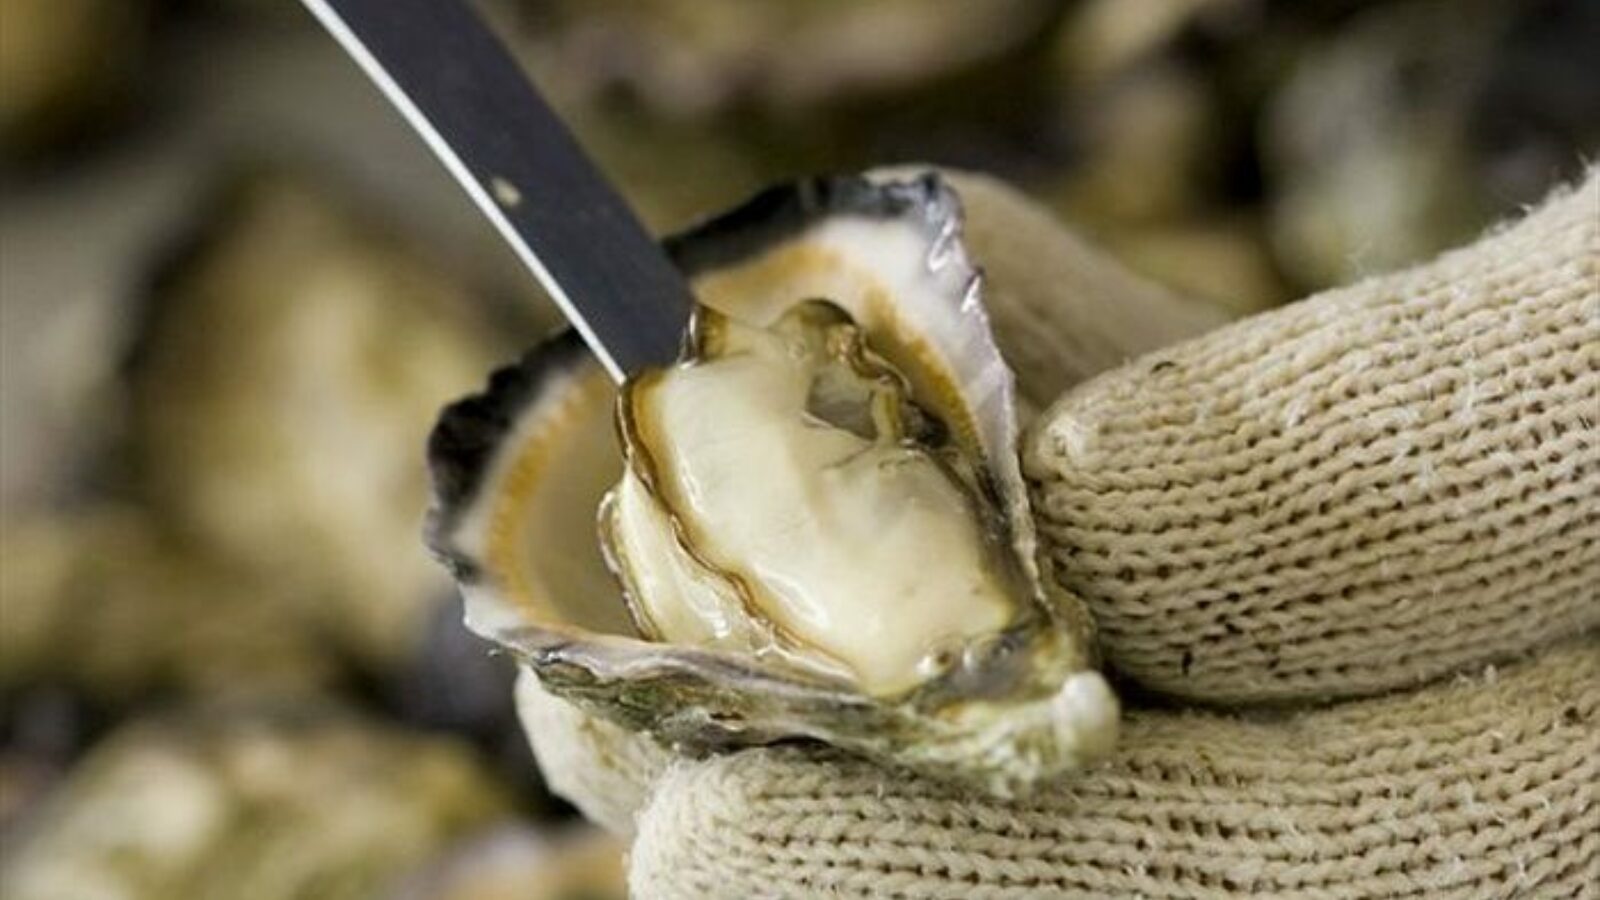 Graham Barclay Oysters shucking